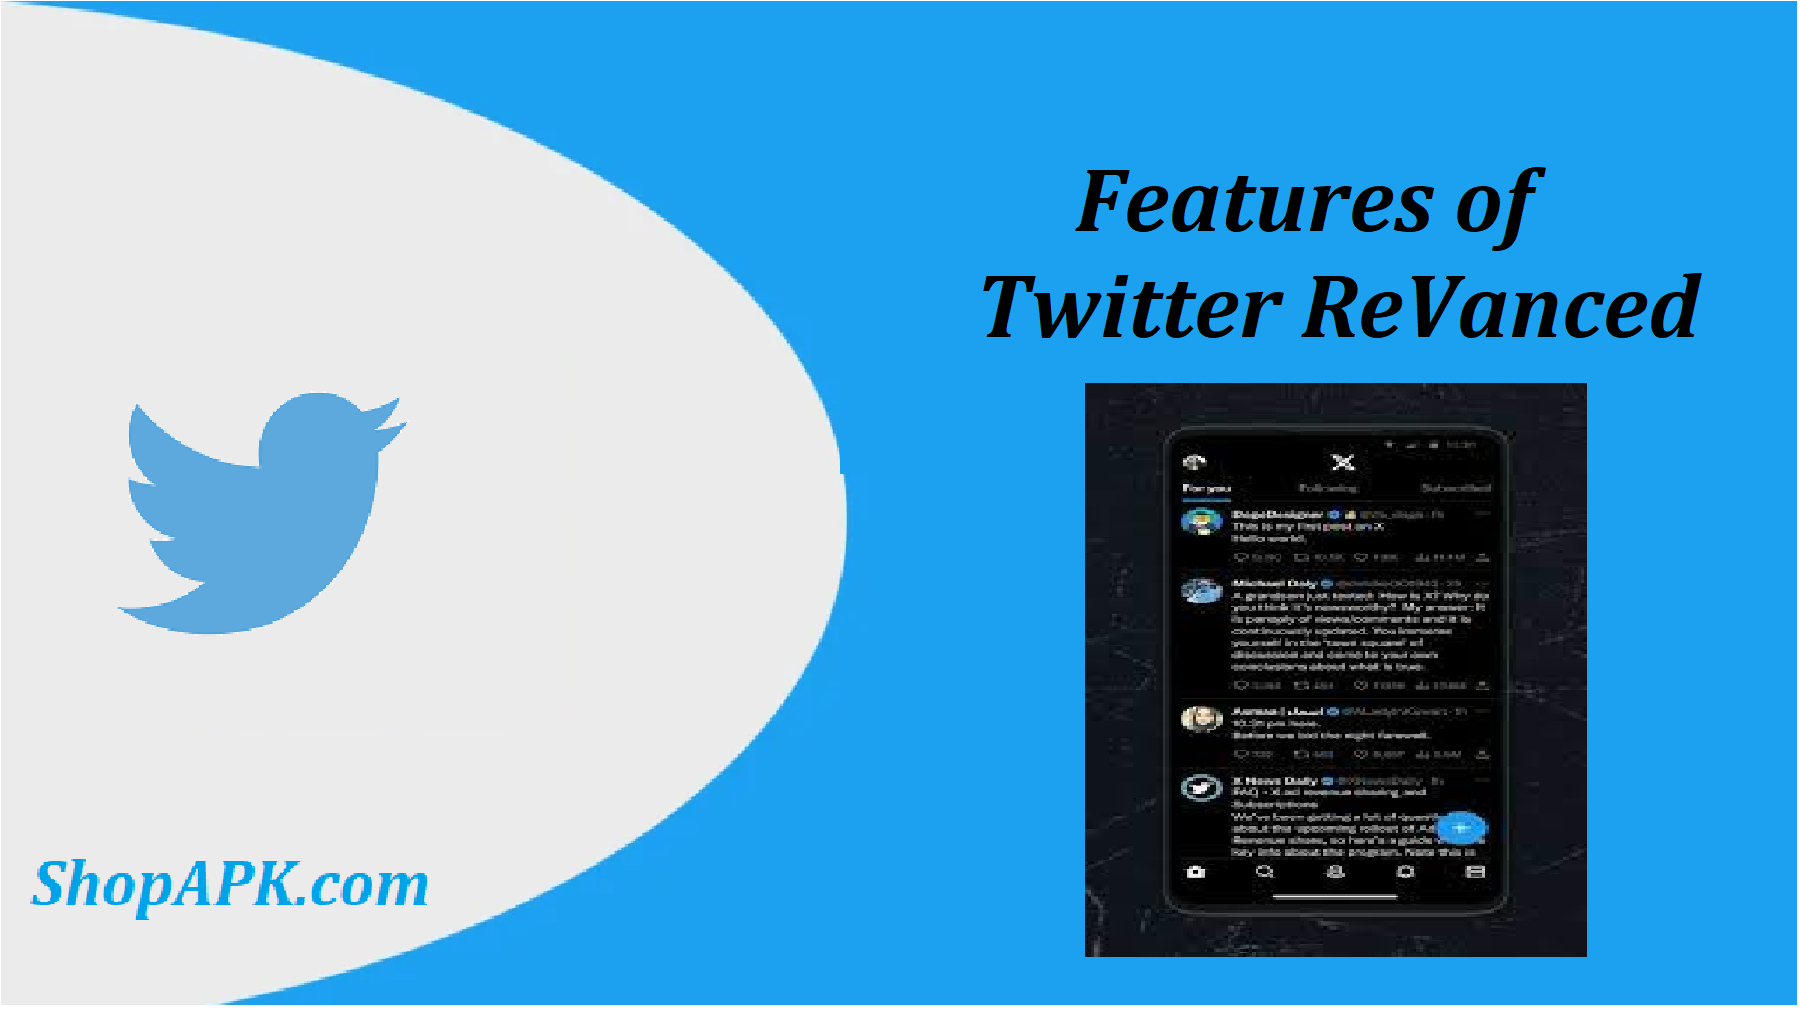 Features of Twitter ReVanced